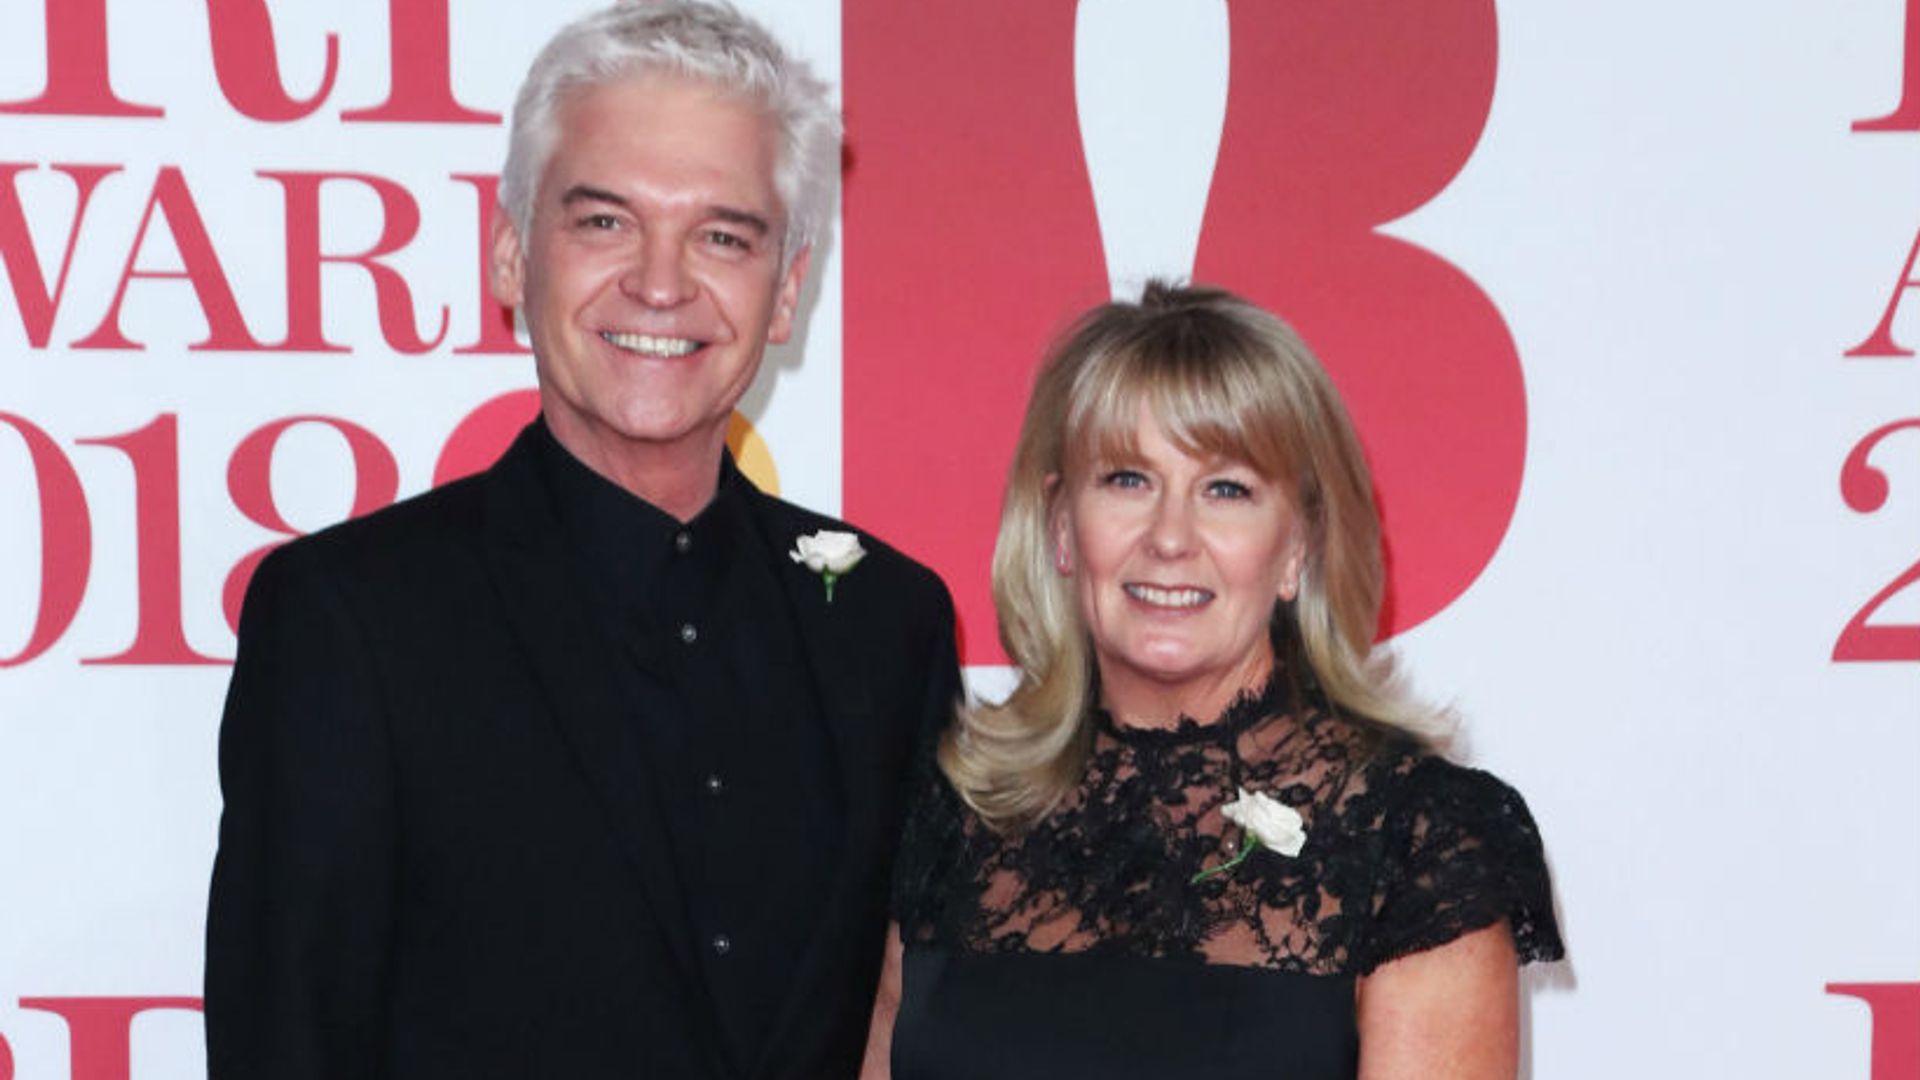 Phillip Schofield and wife Stephanie Lowe make rare red carpet appearance at Brit Awards